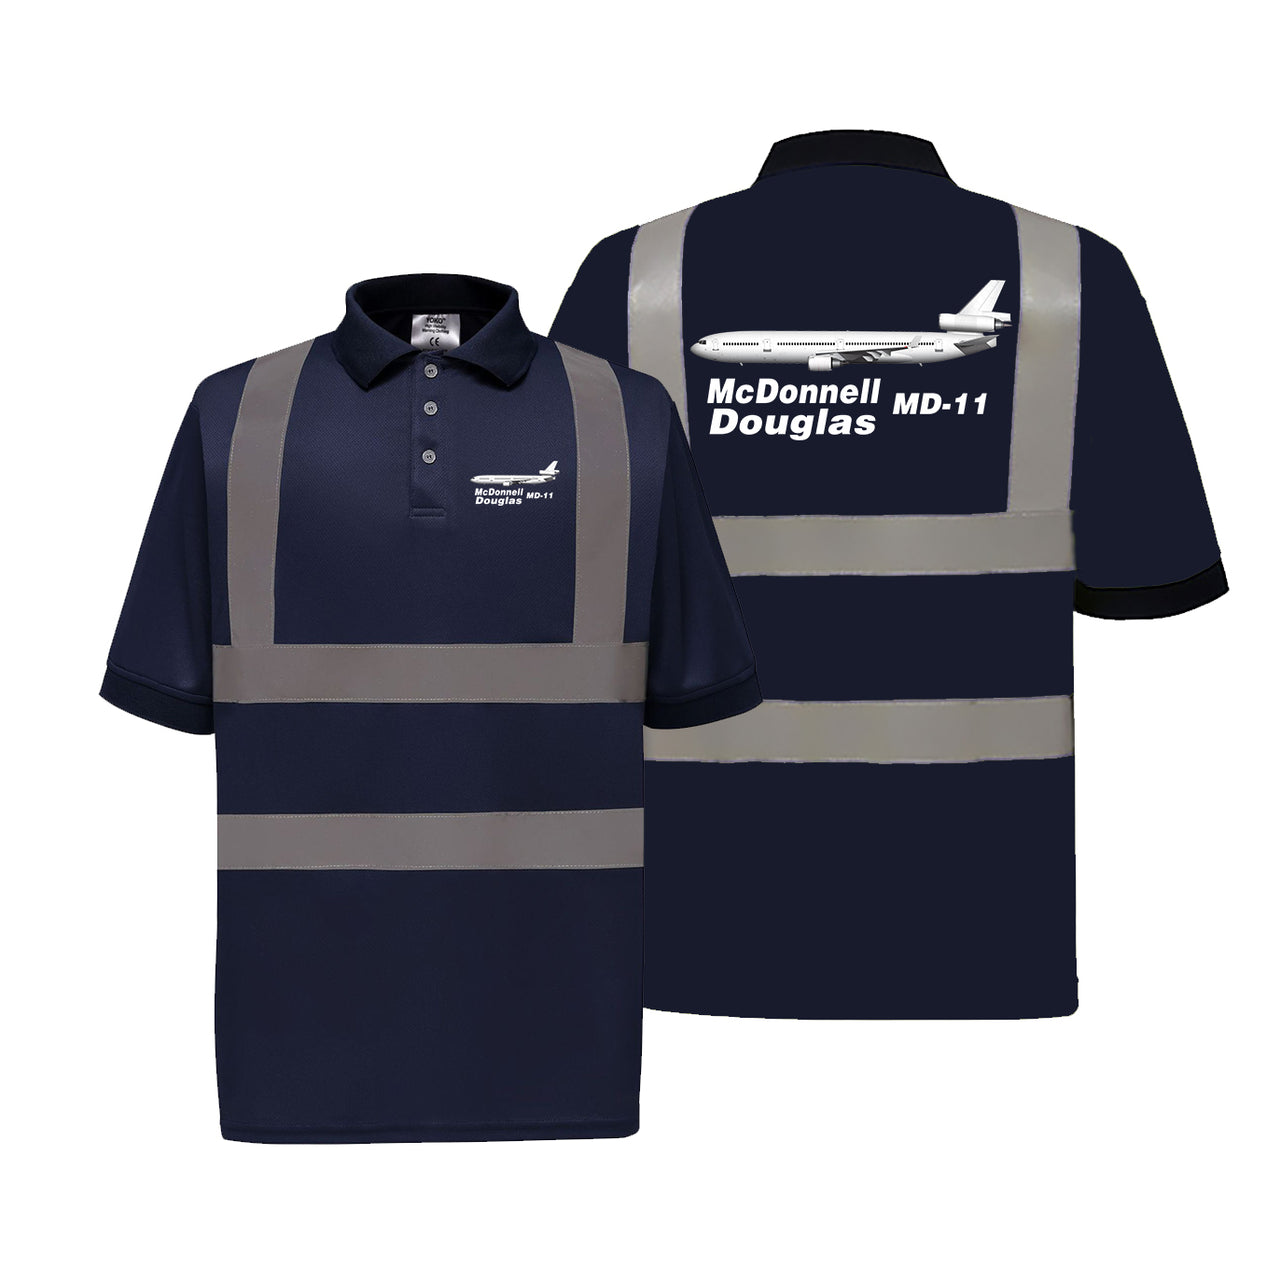 The McDonnell Douglas MD-11 Designed Reflective Polo T-Shirts